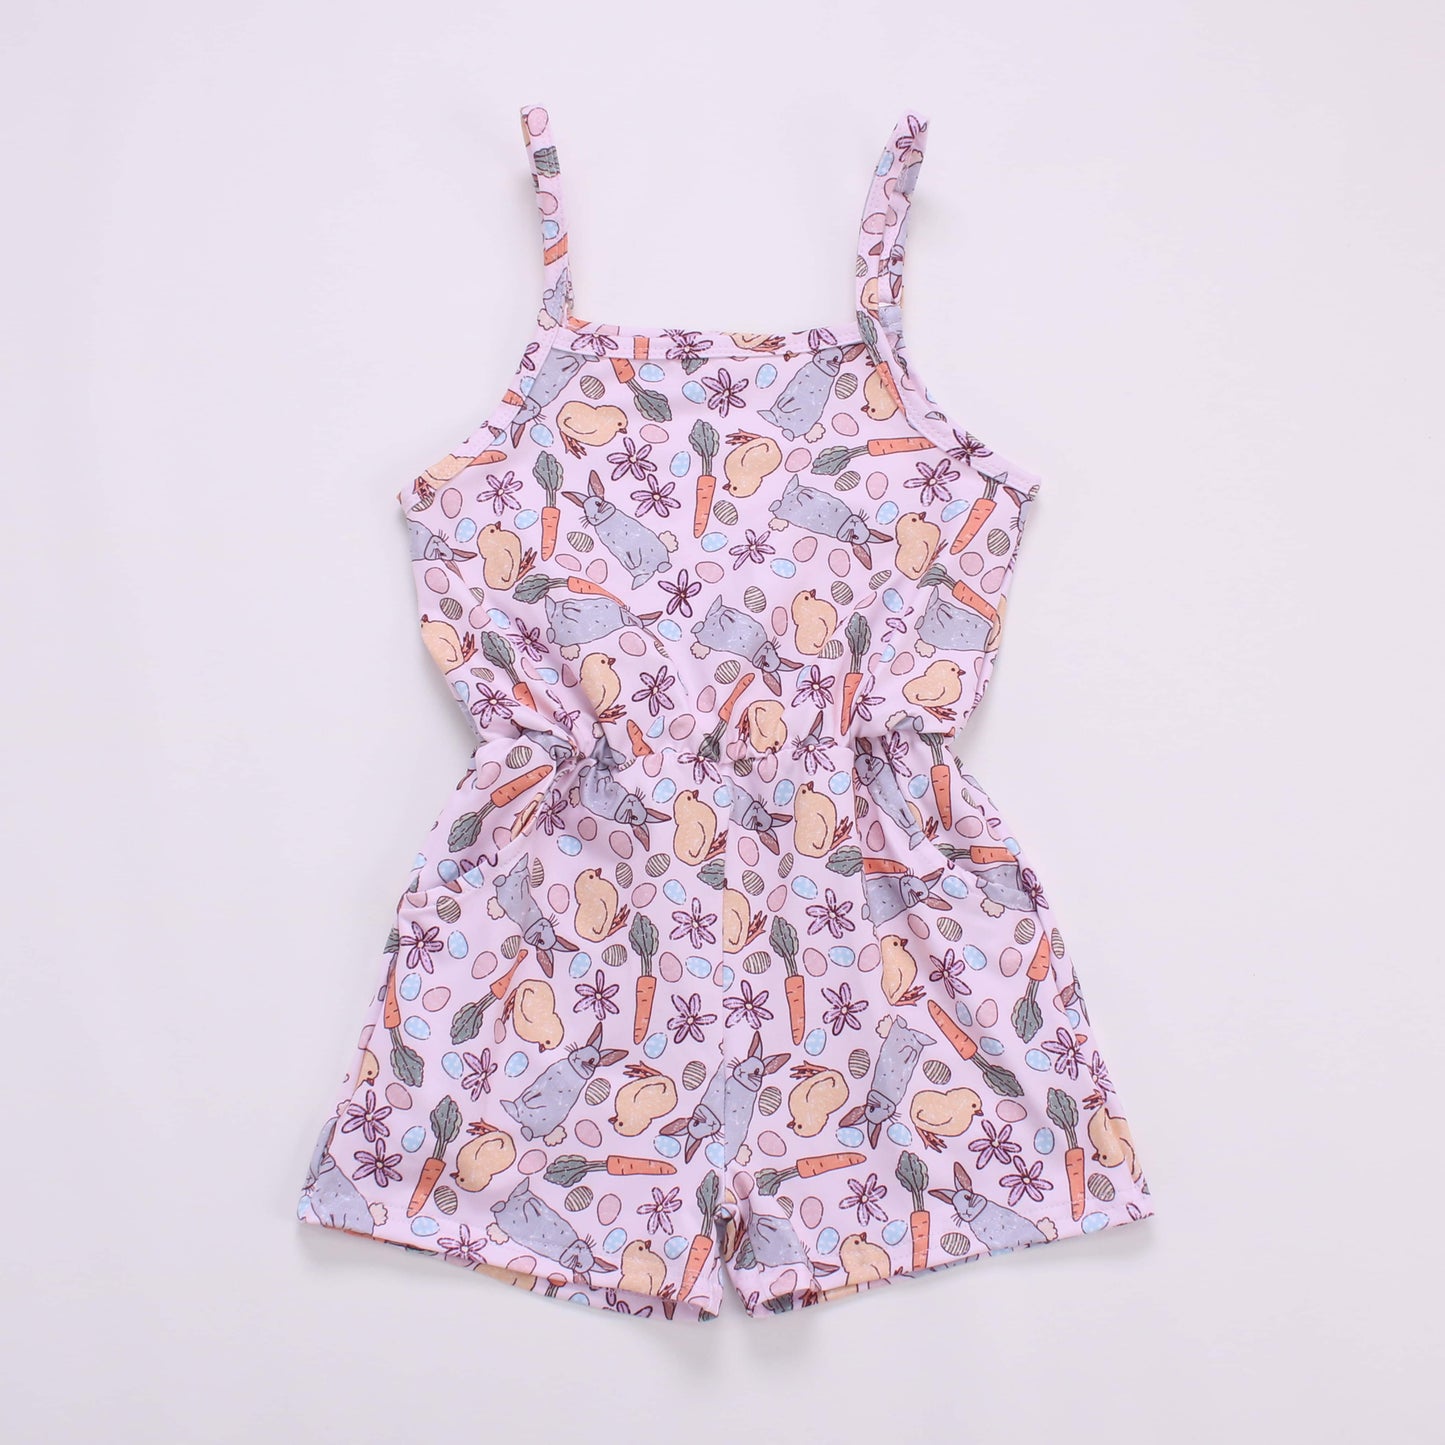 Bunnies and Chicks Shorts Romper